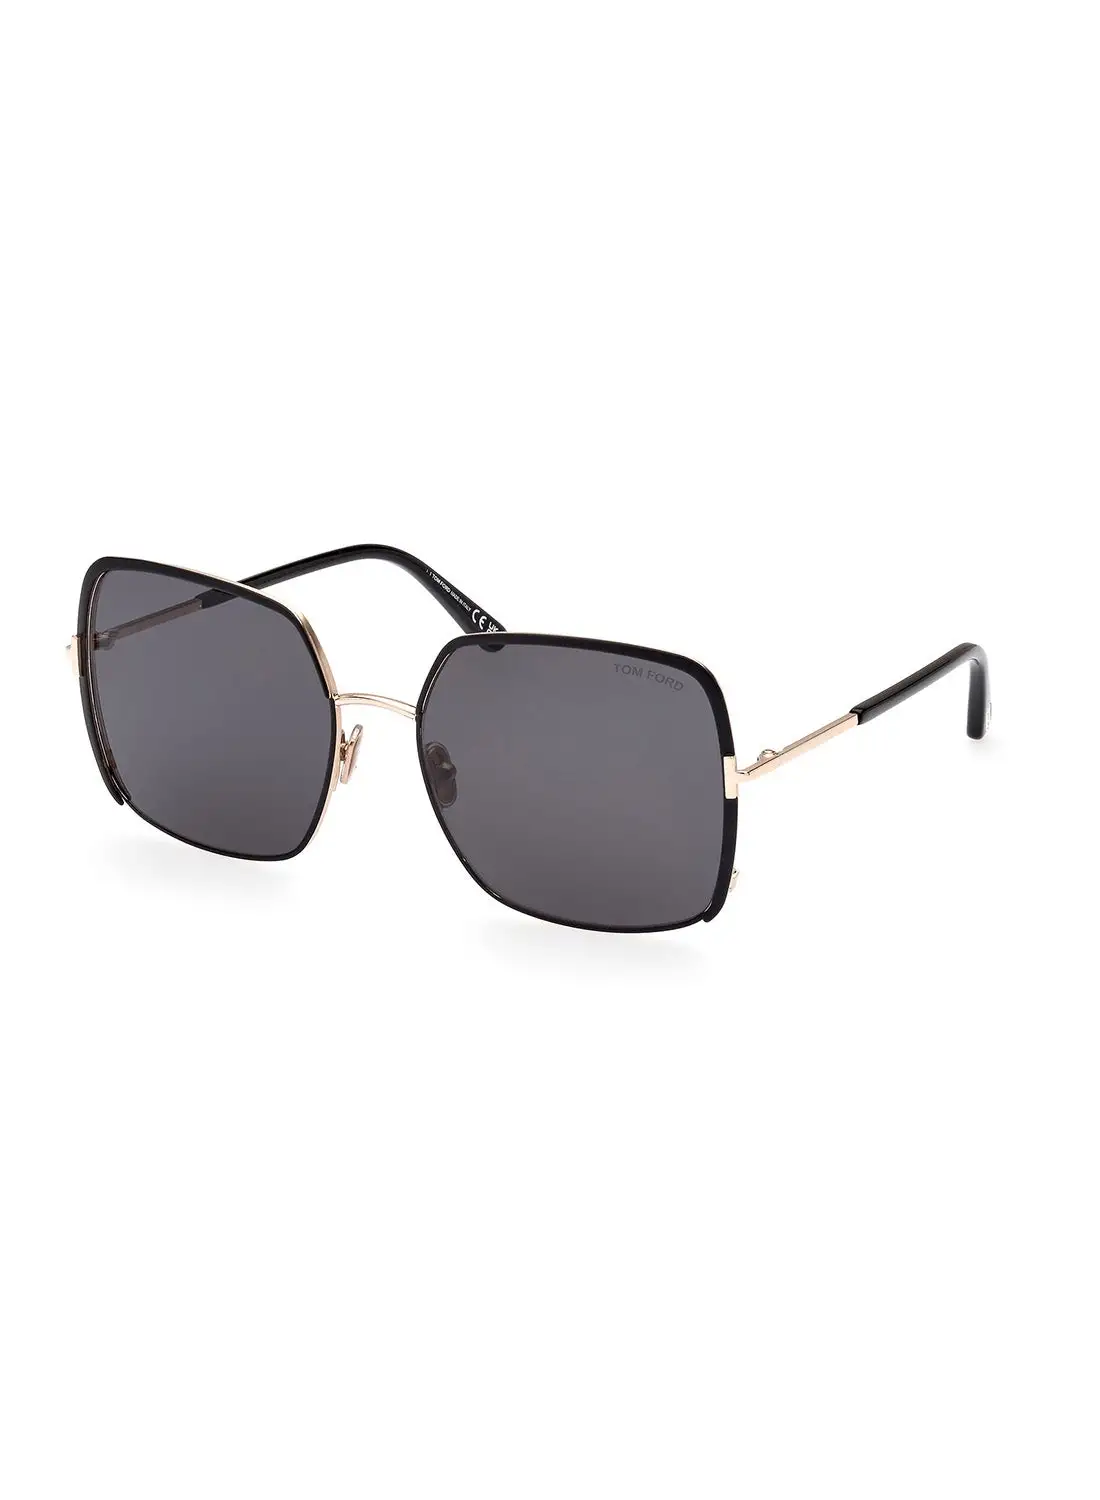 TOM FORD Women's UV Protection Butterfly Sunglasses - FT100602A60 - Lens Size: 60 Mm